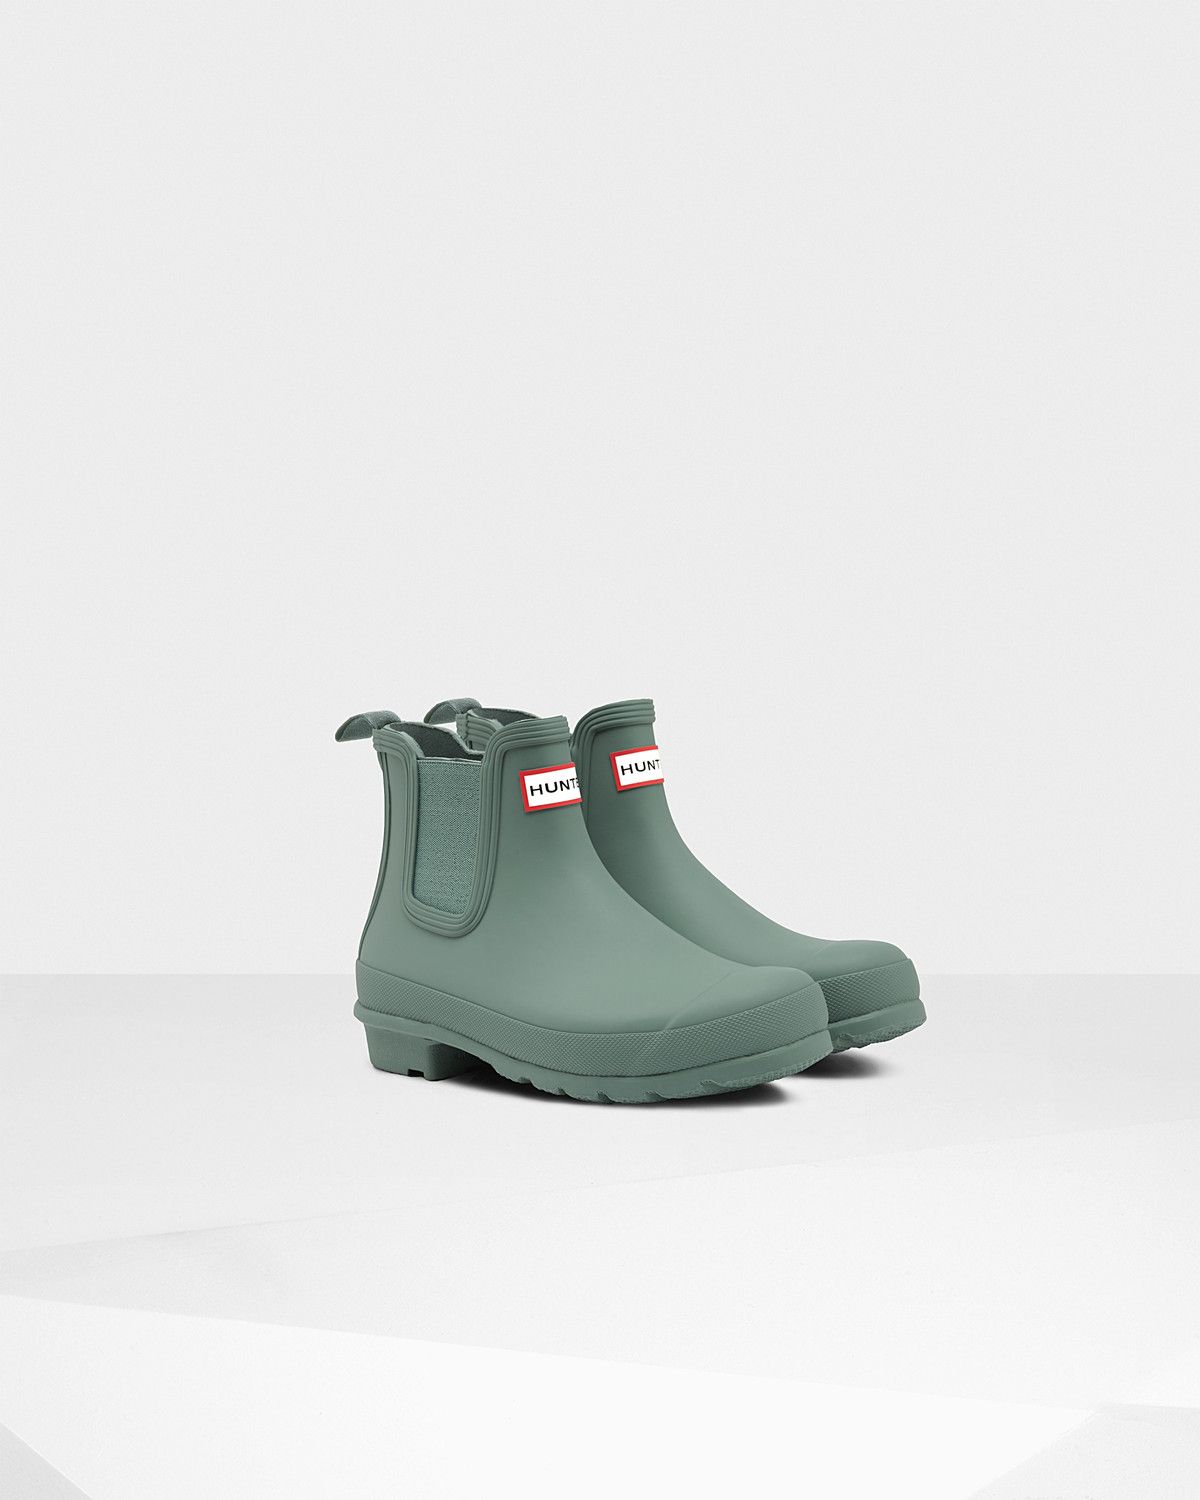 The handcrafted Original Chelsea boot in a matte finish.